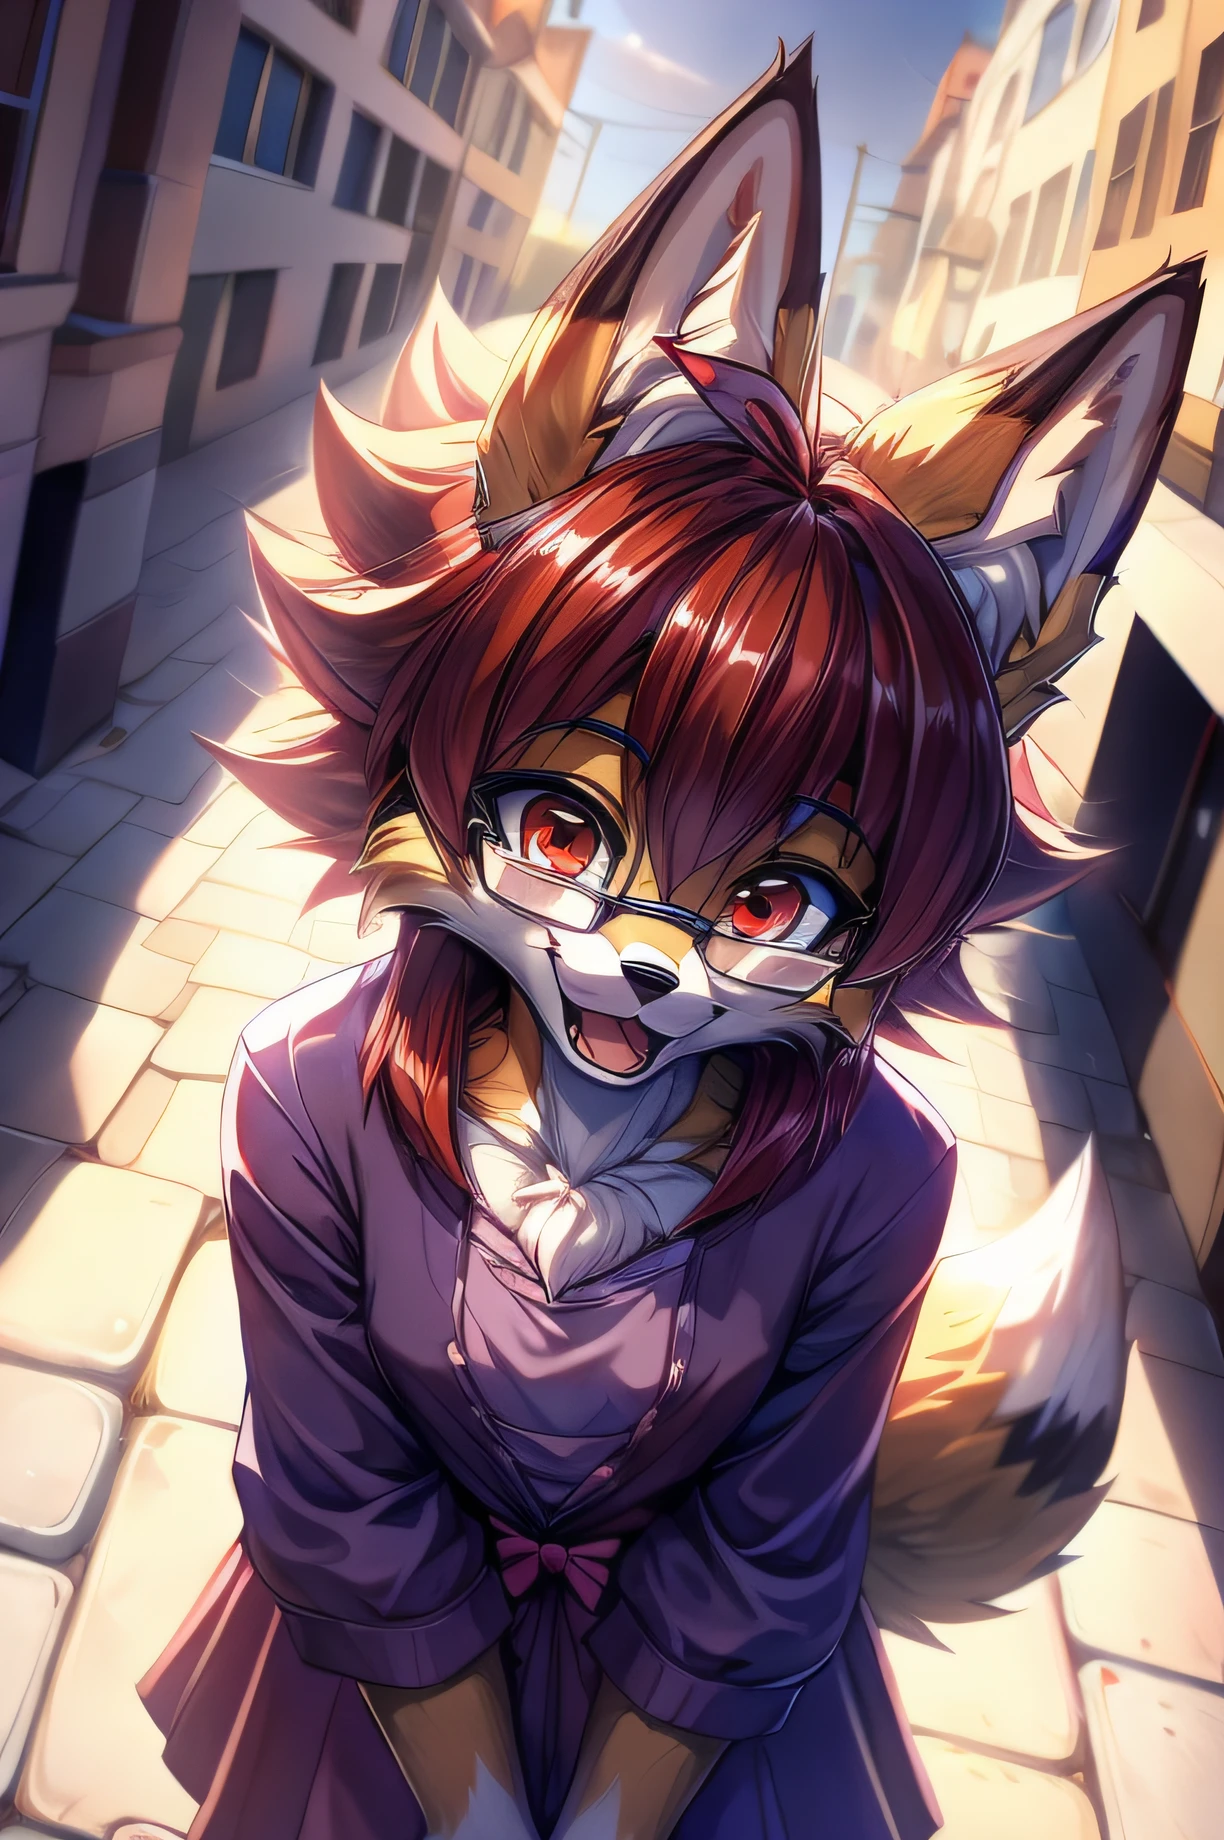 fox furry girl with short red hair, fluffy hair shy, beautiful red eyes, wearing glasses,  very  fluffy tail, , bow in hair, 17 years old, happy , happy mouth, young body, Good girl, wearing a cute purple modest cute outfit, leaning over, walking in the streets, being adorable, proud girl, wanting to be loved, side perspective